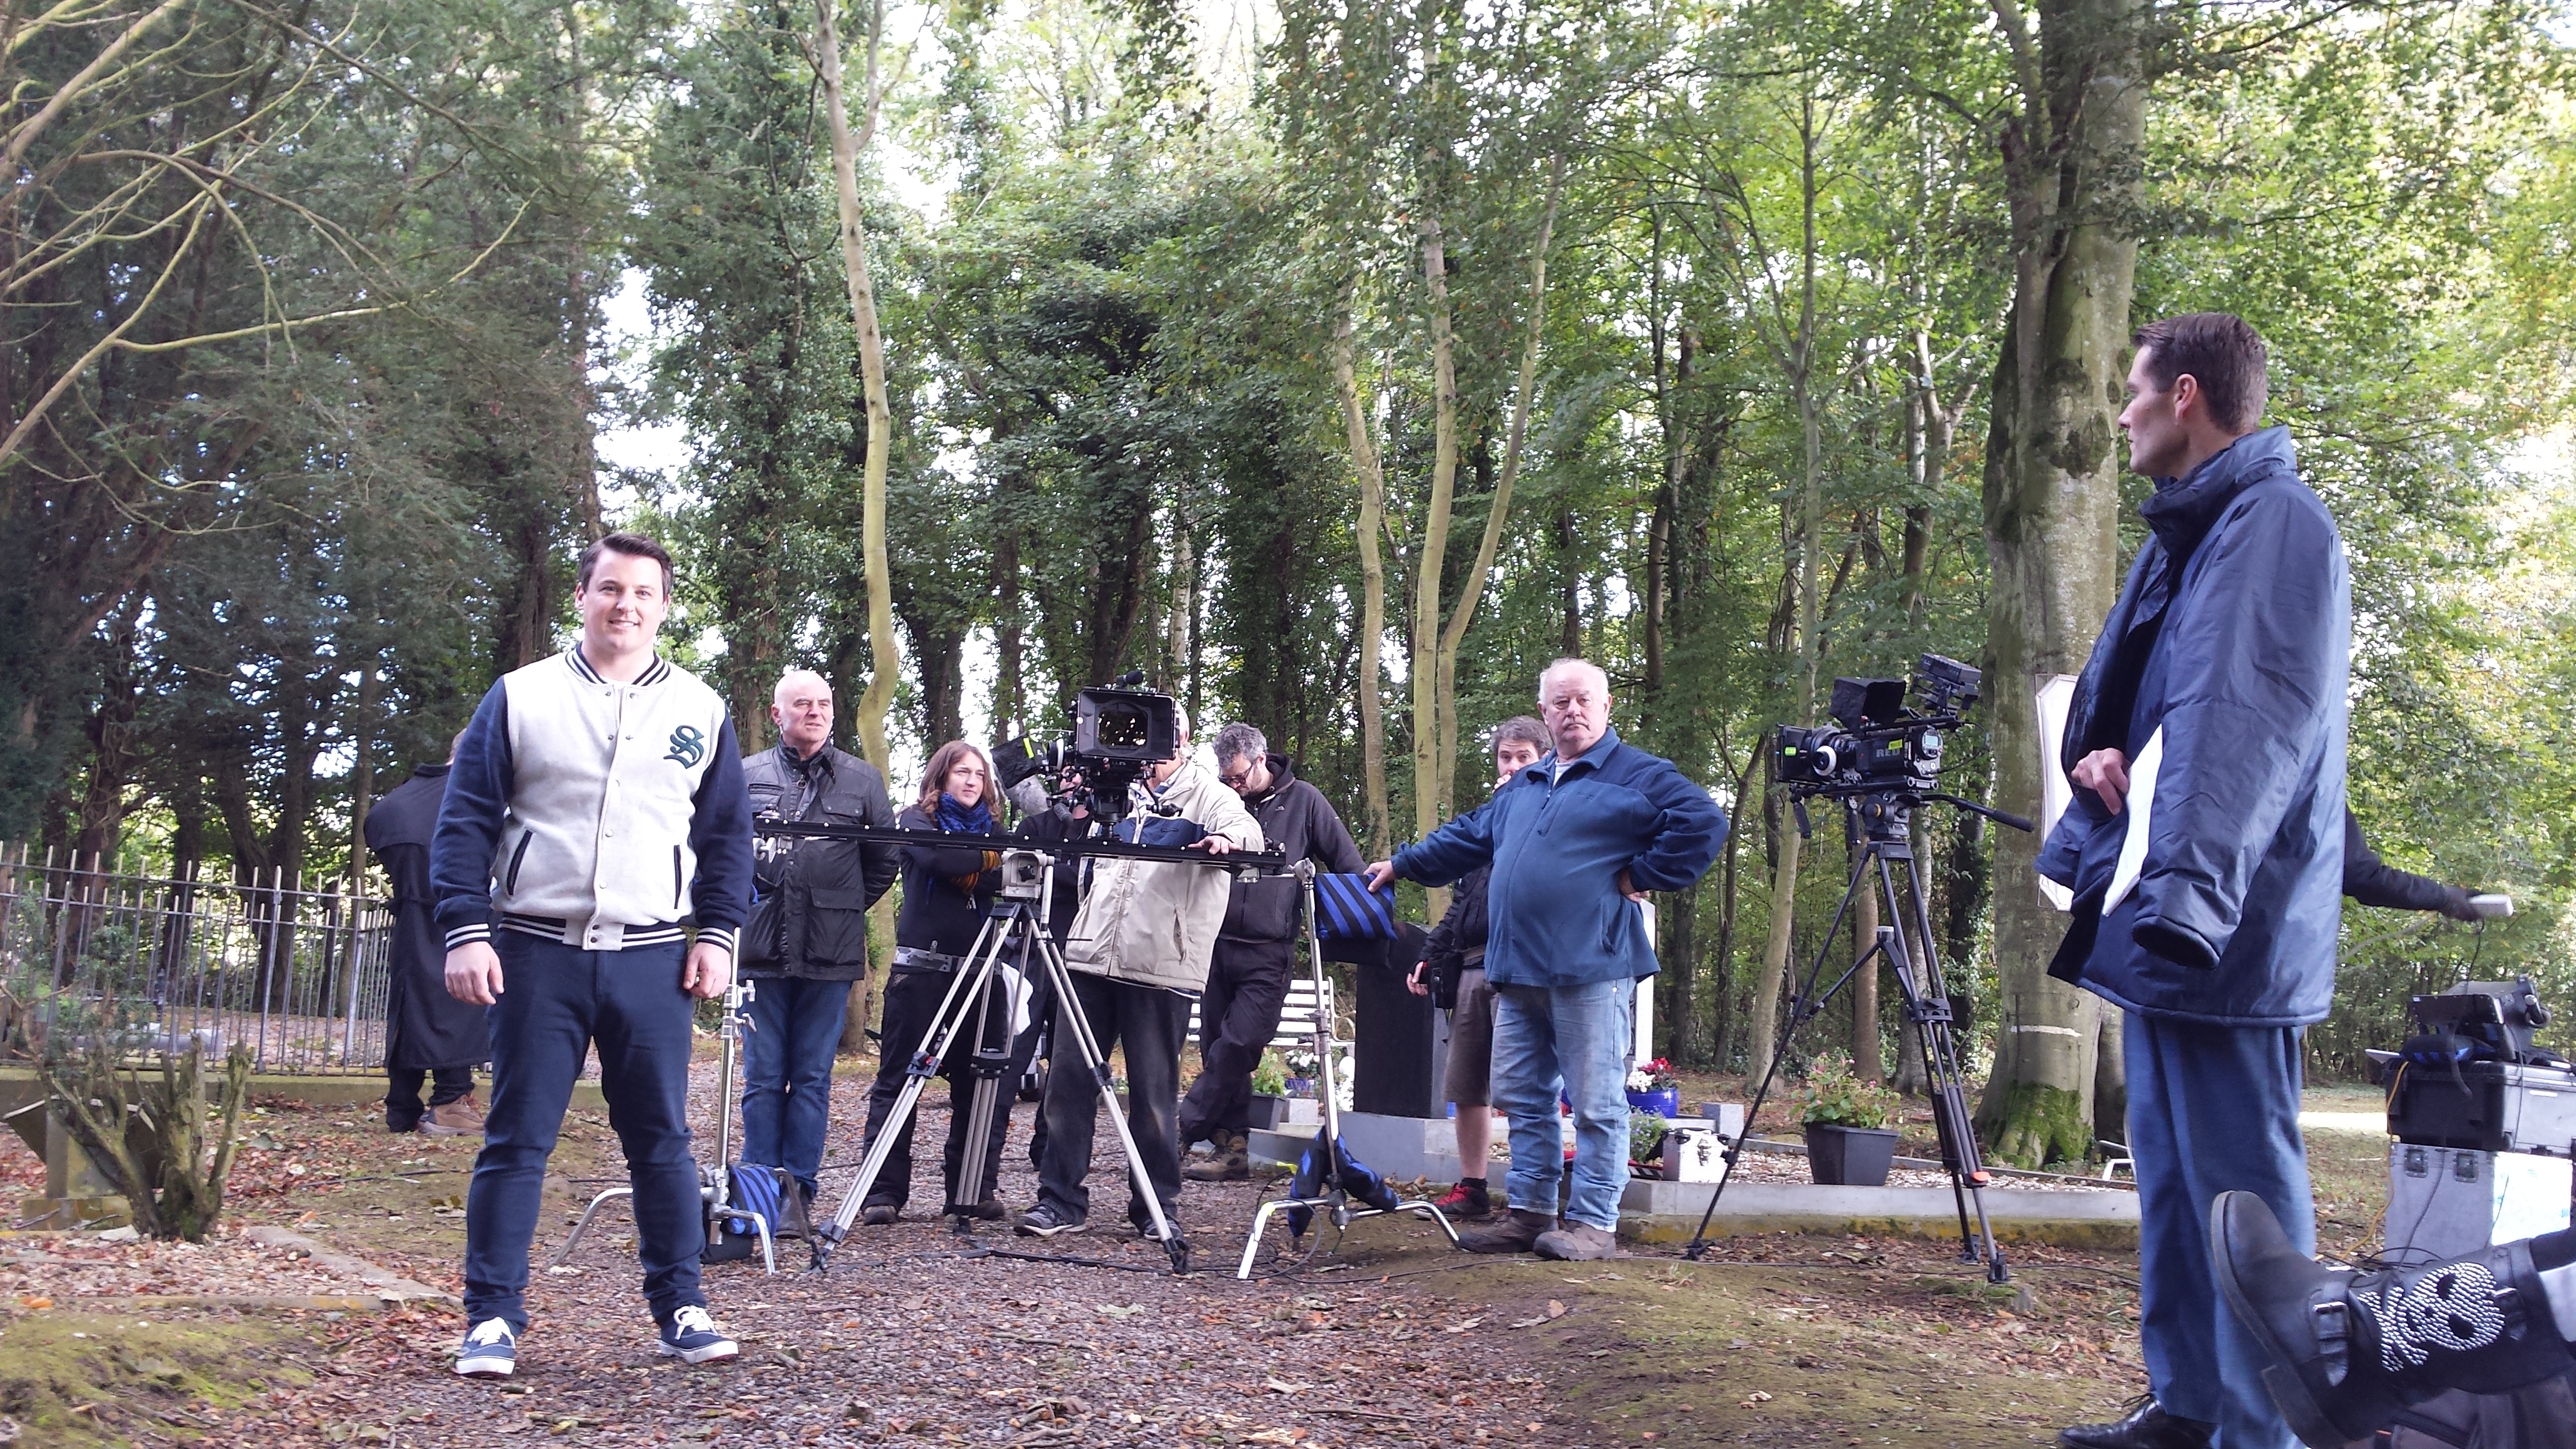 Declan Reynolds (L) and Adam Goodwin (R) with the crew on set of THE GAELIC COURSE in Newbridge, Co. Kildare.